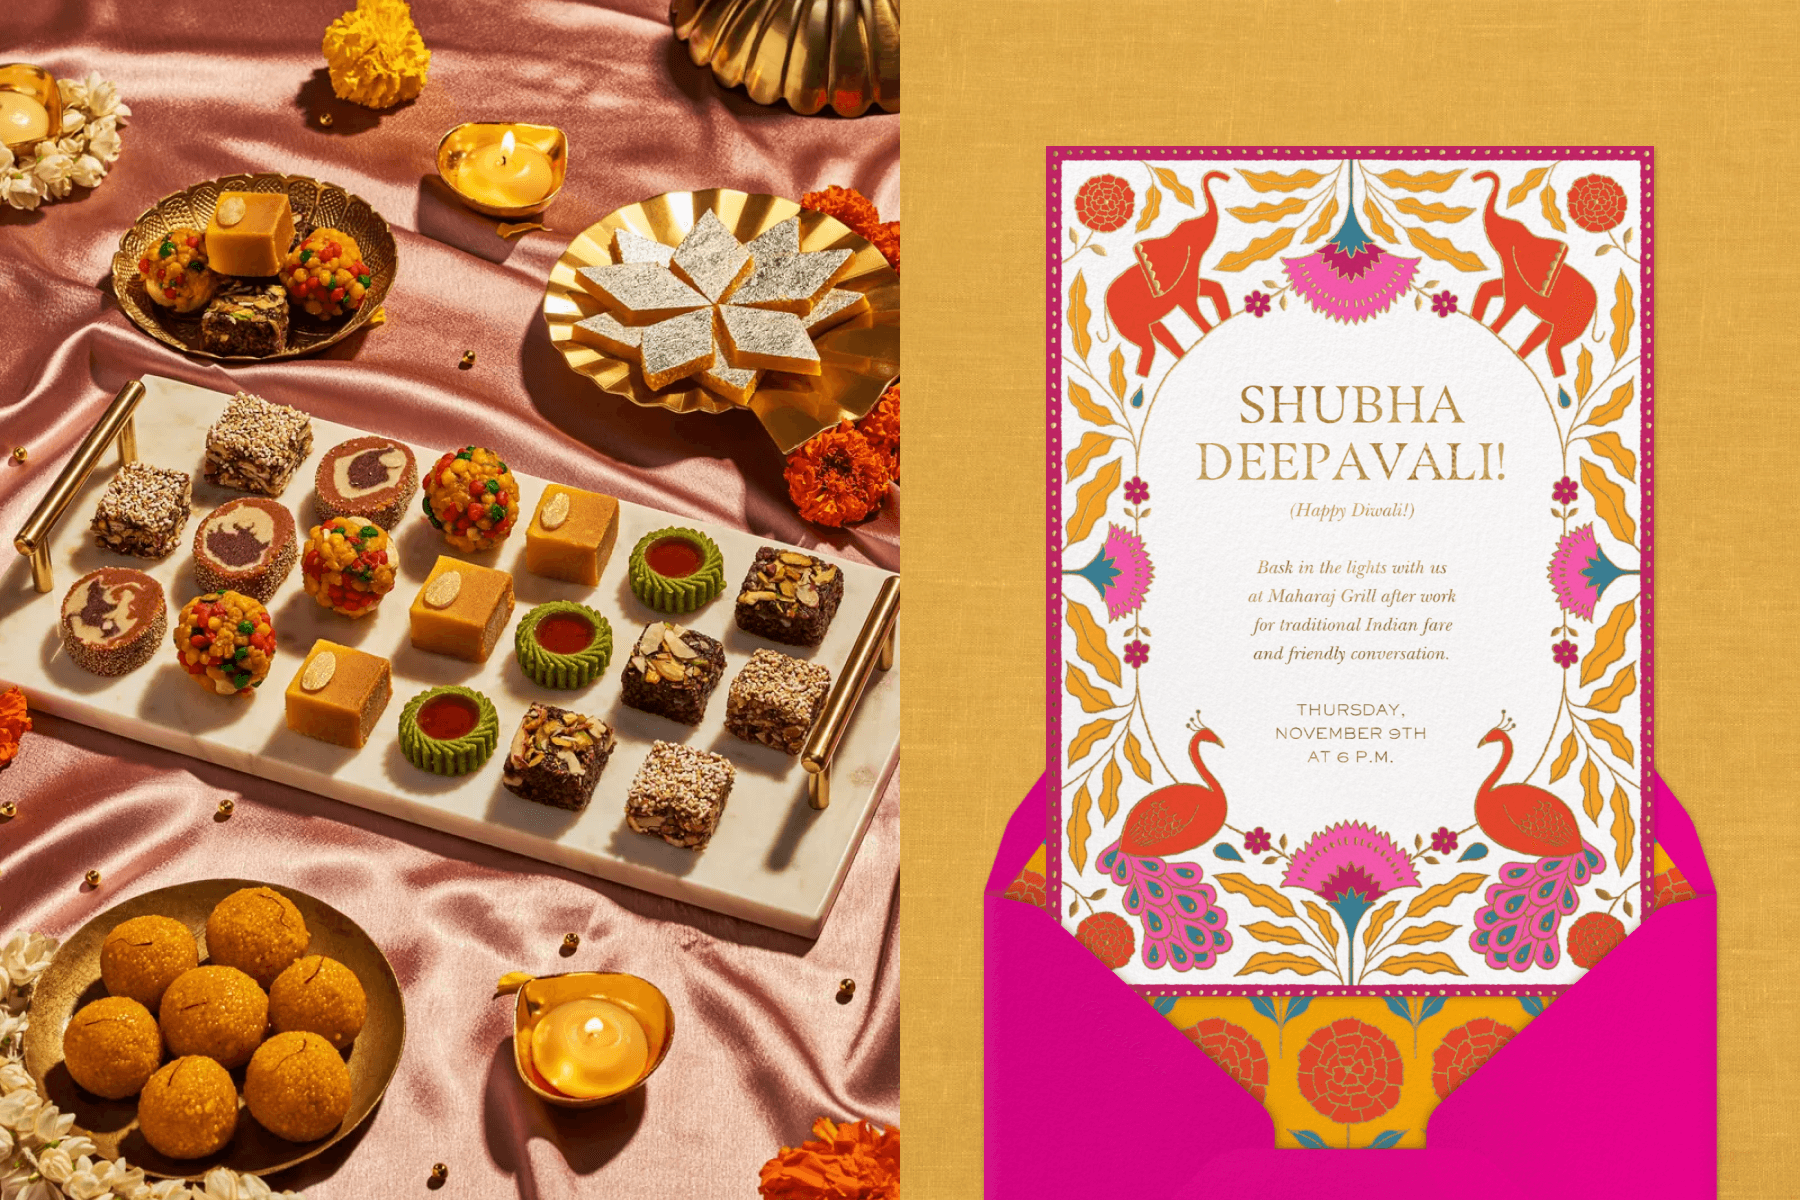 Left: An assortment of Diwali desserts; Right: A Diwali invitation with a peacock and elephant border.